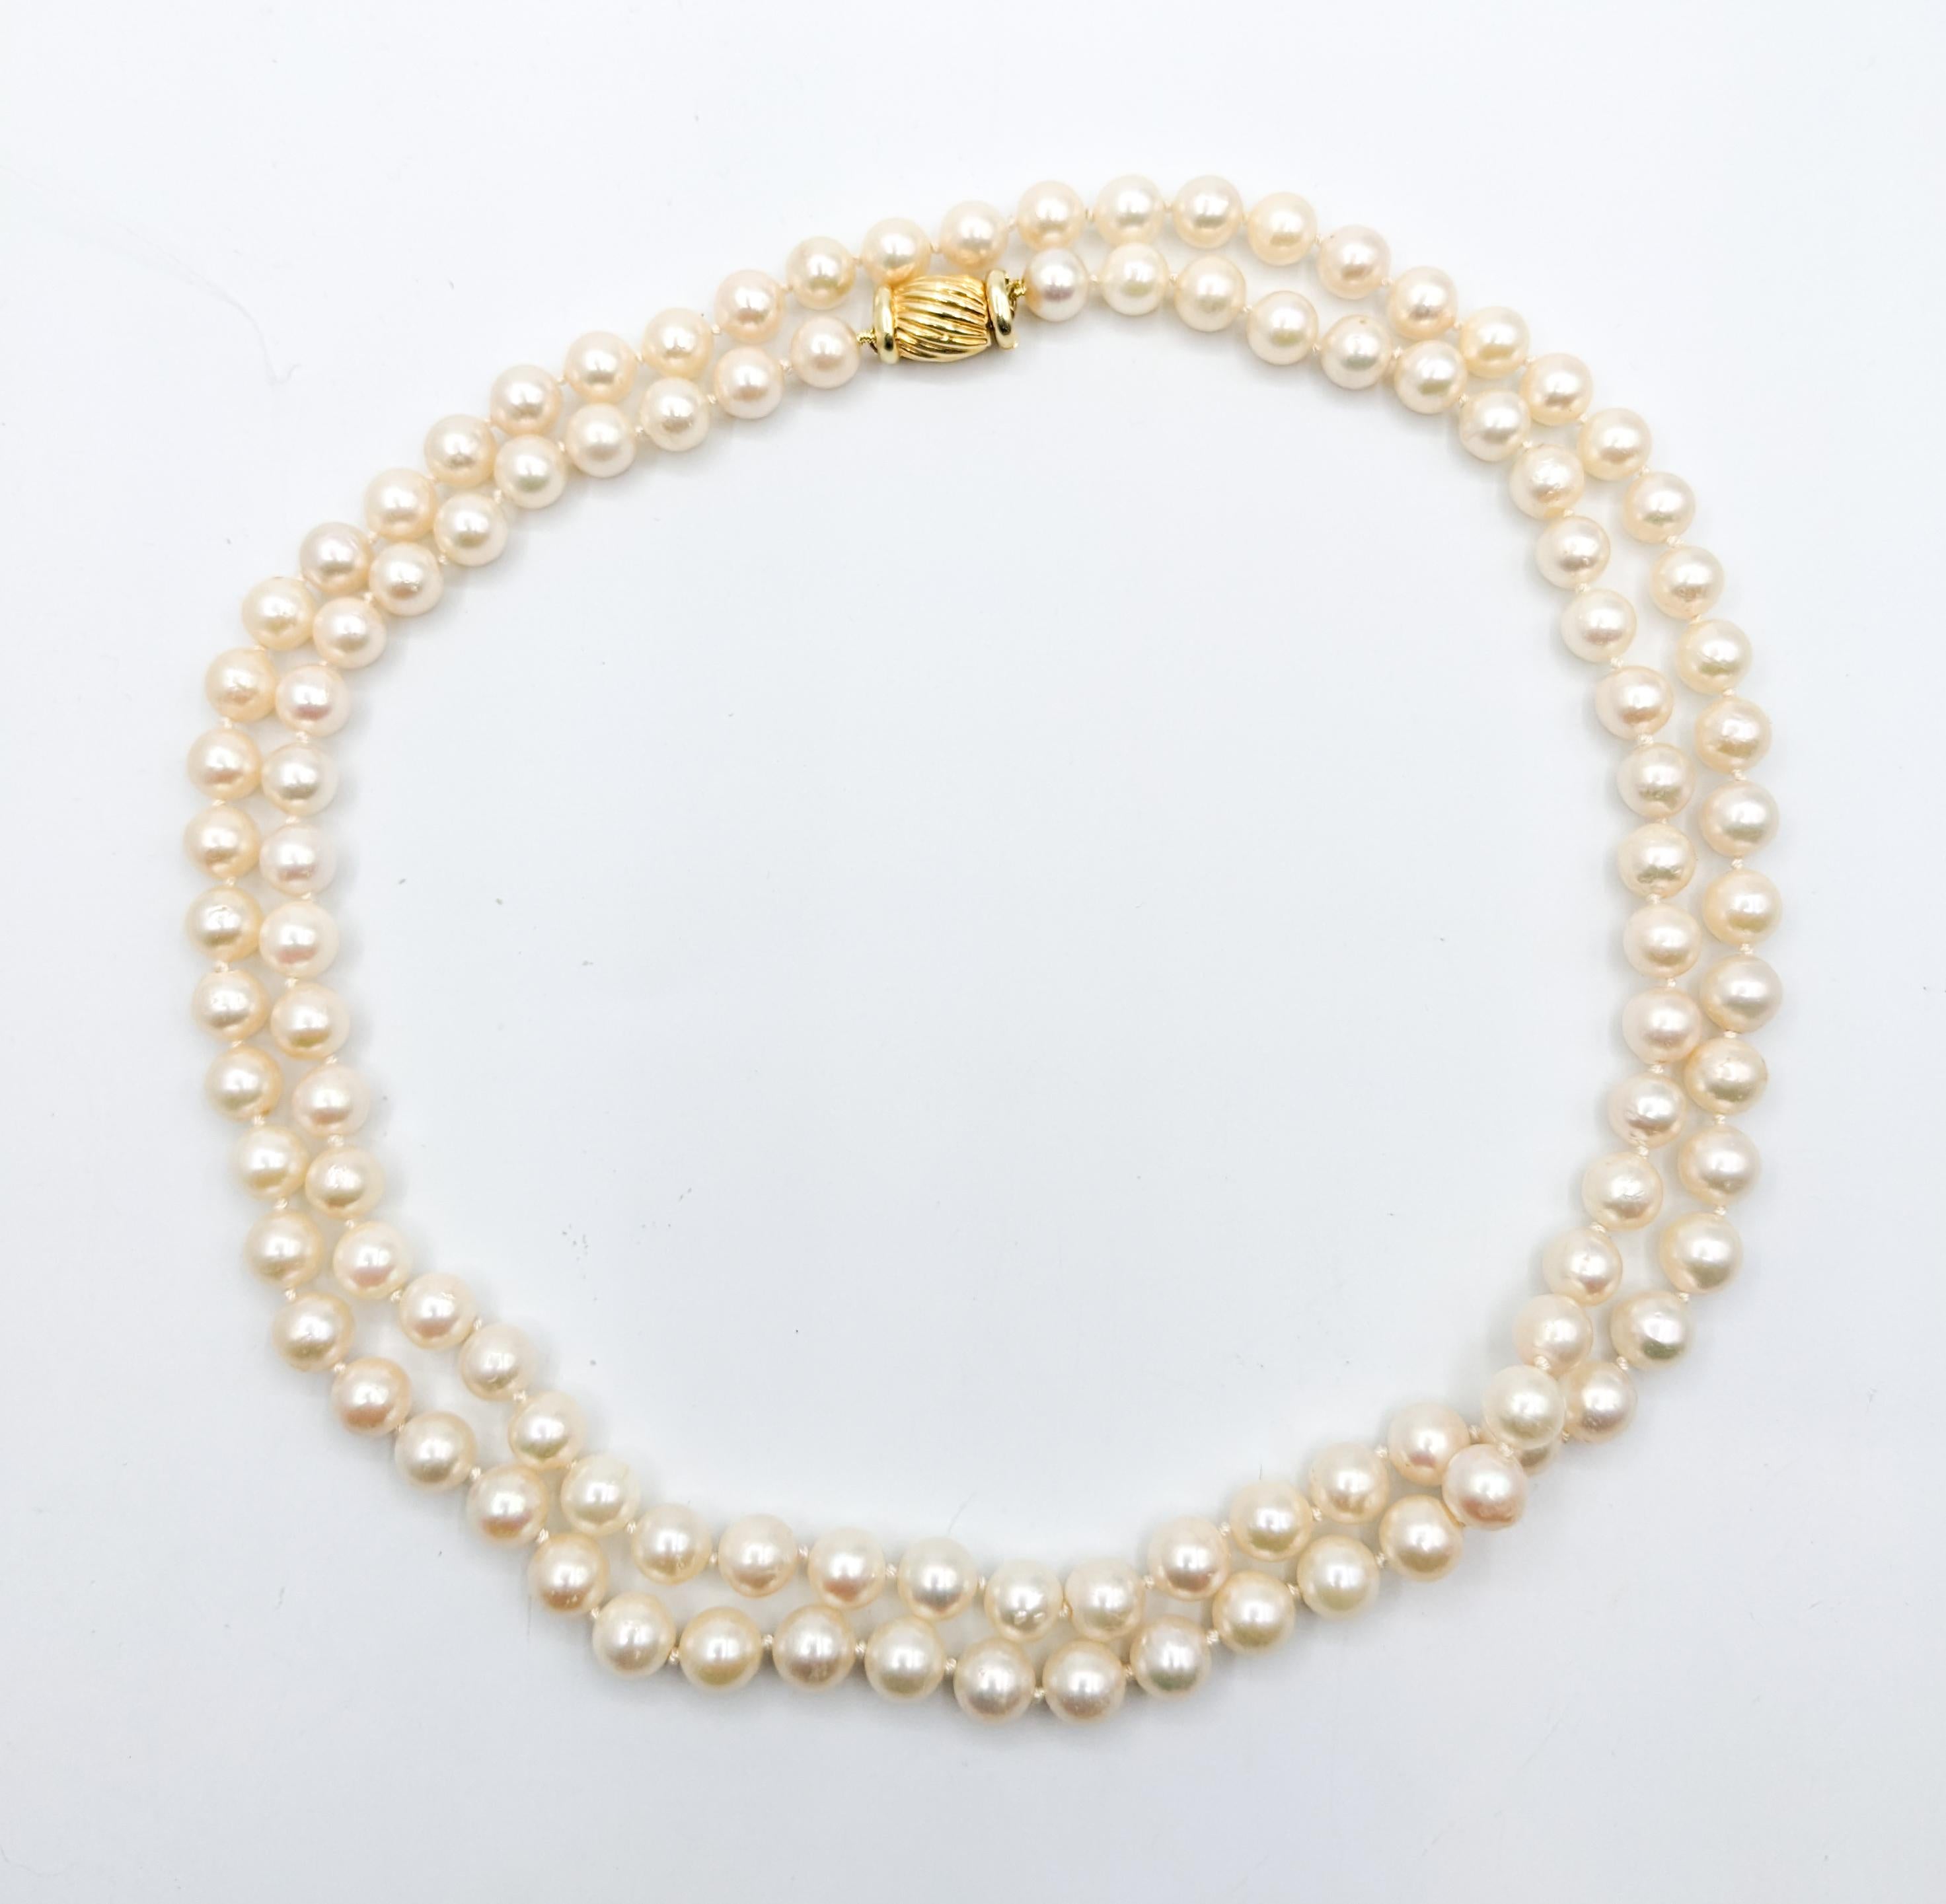 Round Cut 7.55mm Akoya Pearl 37 Inch Strand Necklace